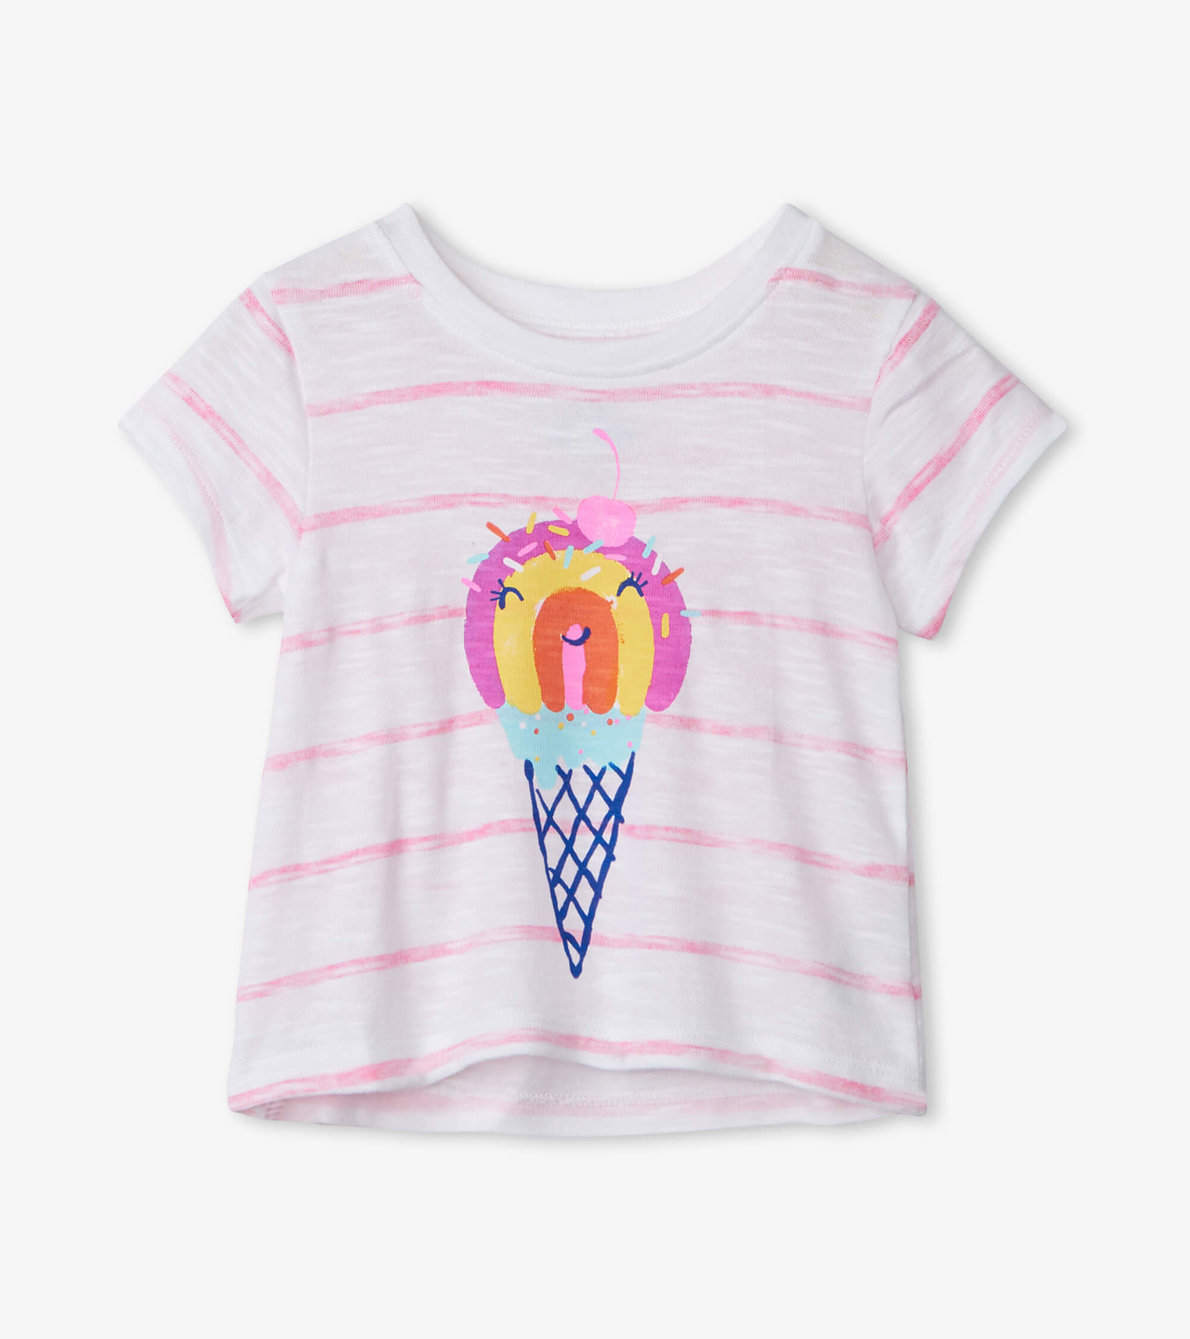 View larger image of Delightful Cone Baby Tee